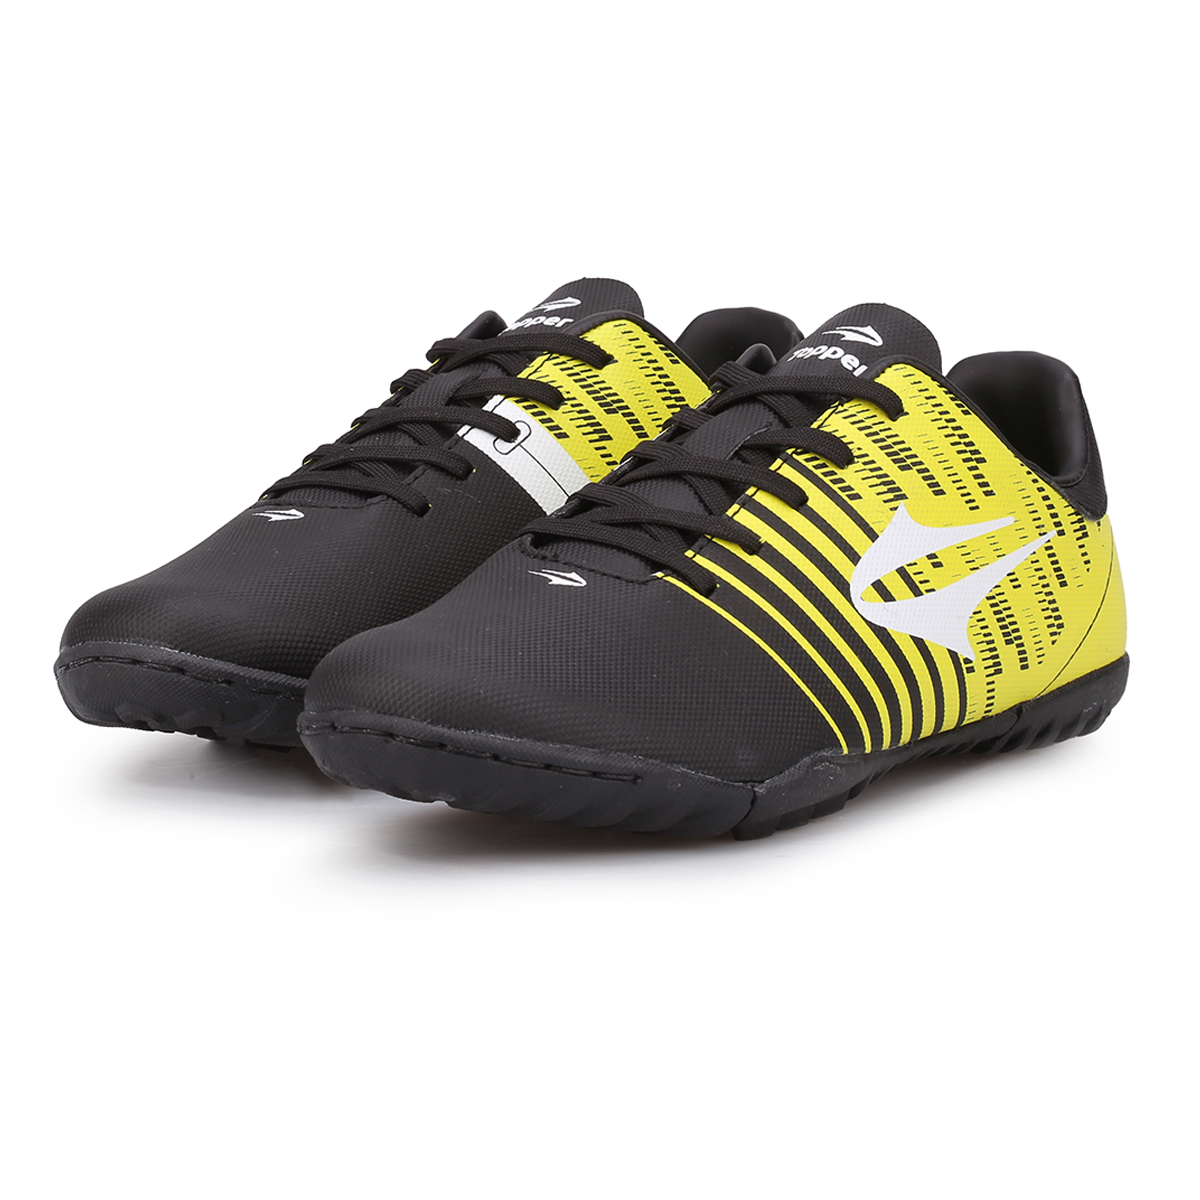 Botines Topper Kaiser II Tf,  image number null